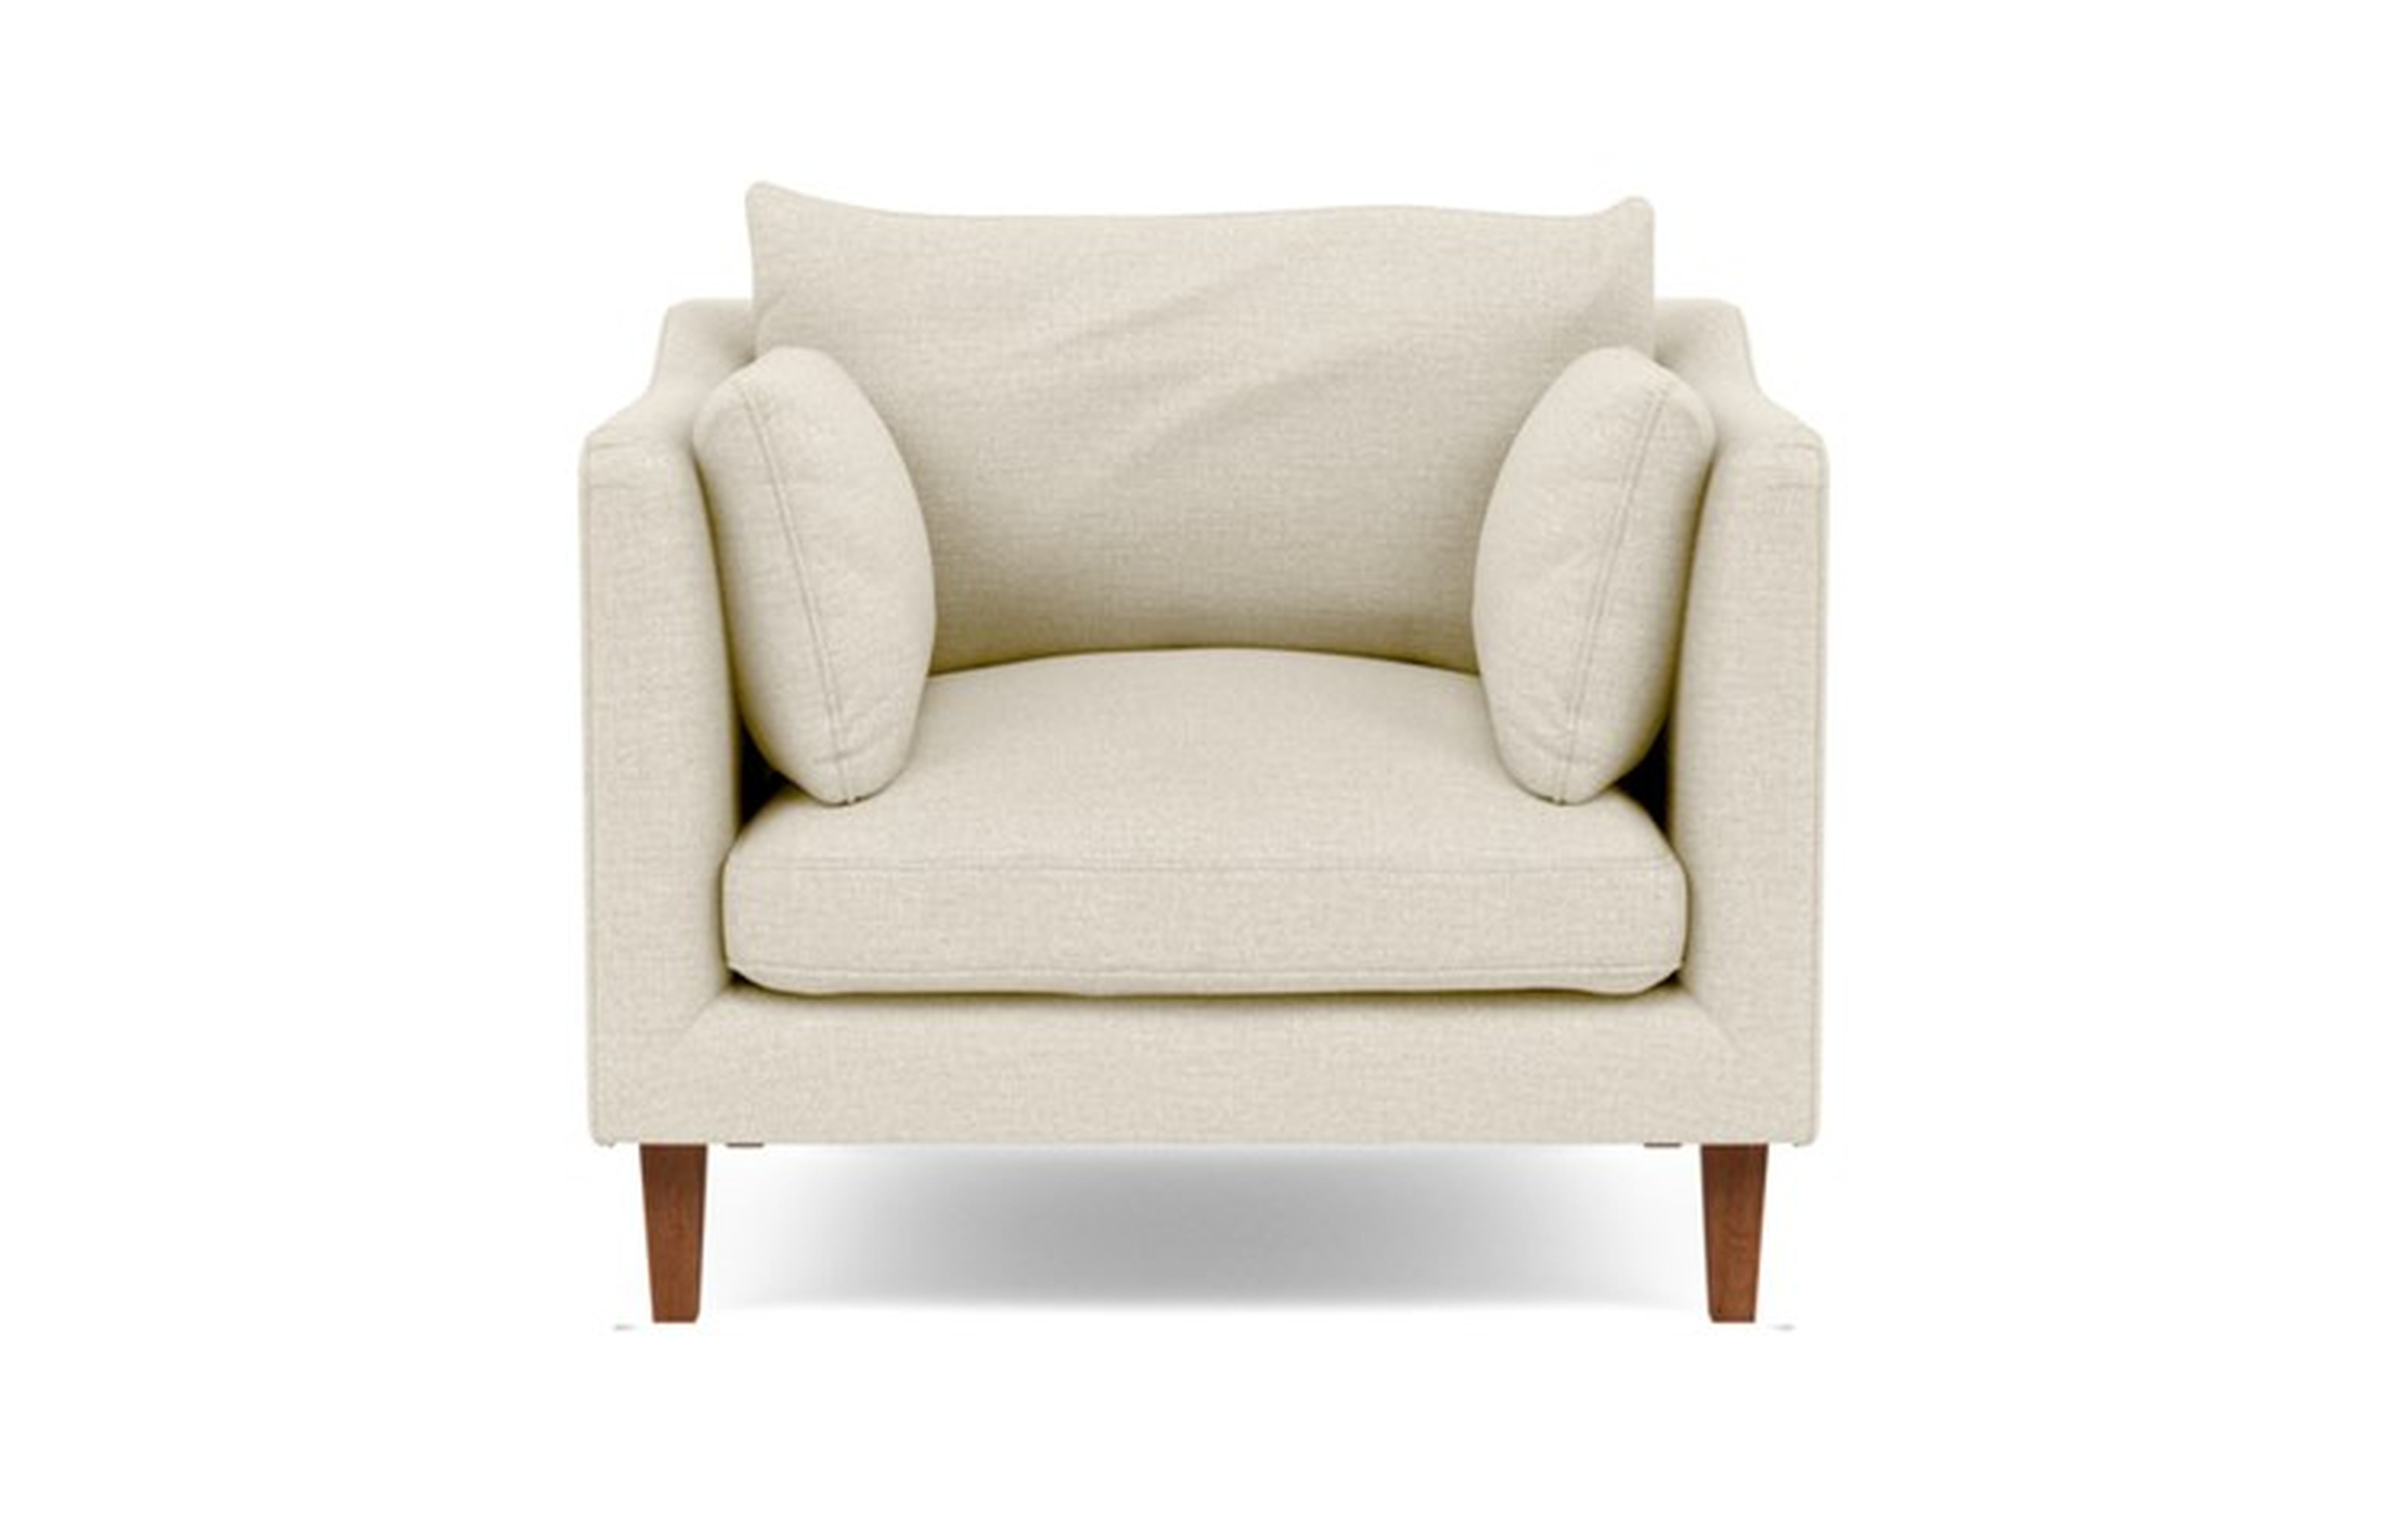 CUSTOM - CAITLIN BY THE EVERYGIRL Accent Chair - Heathered Weave Oatmeal - Oiled Walnut Tapered Square Wood - Interior Define